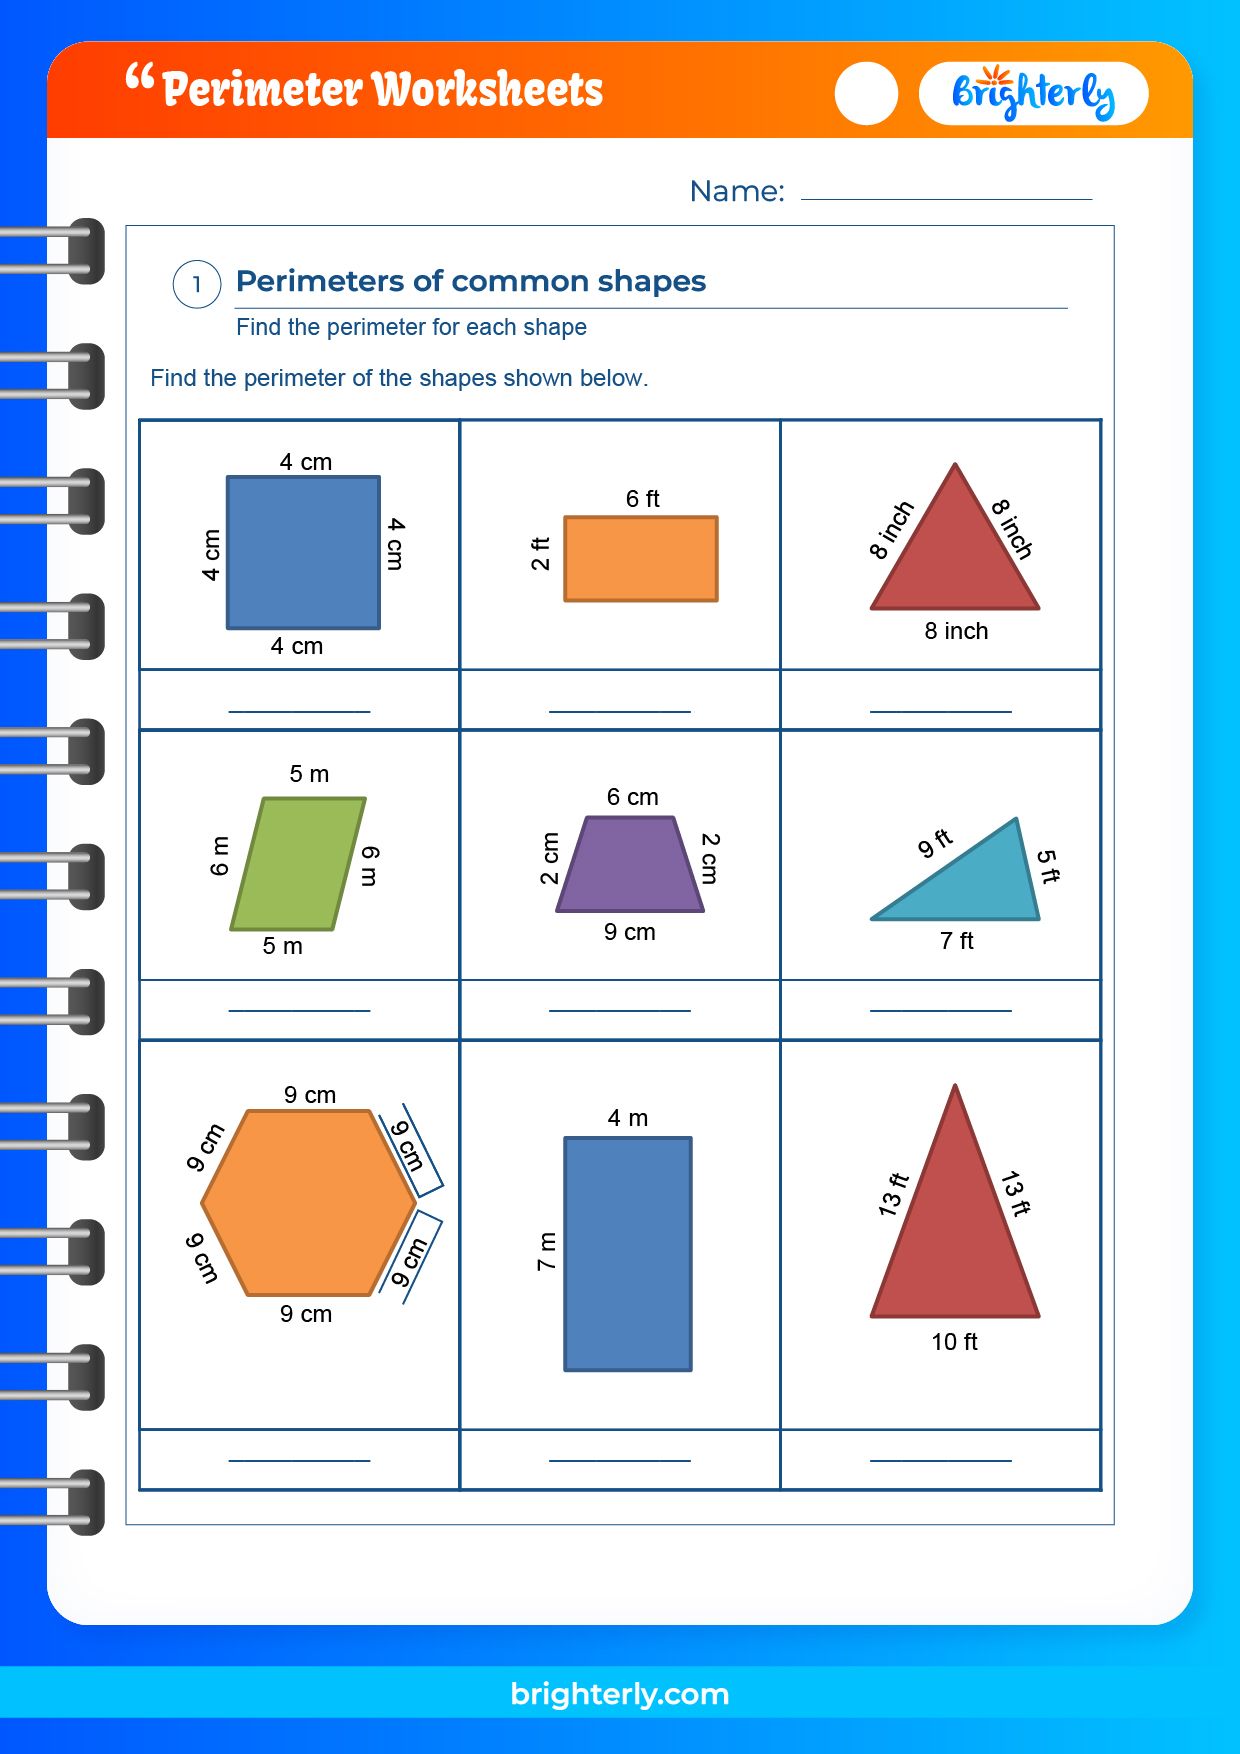 free-printable-perimeter-worksheets-word-problems-pdfs-brighterly